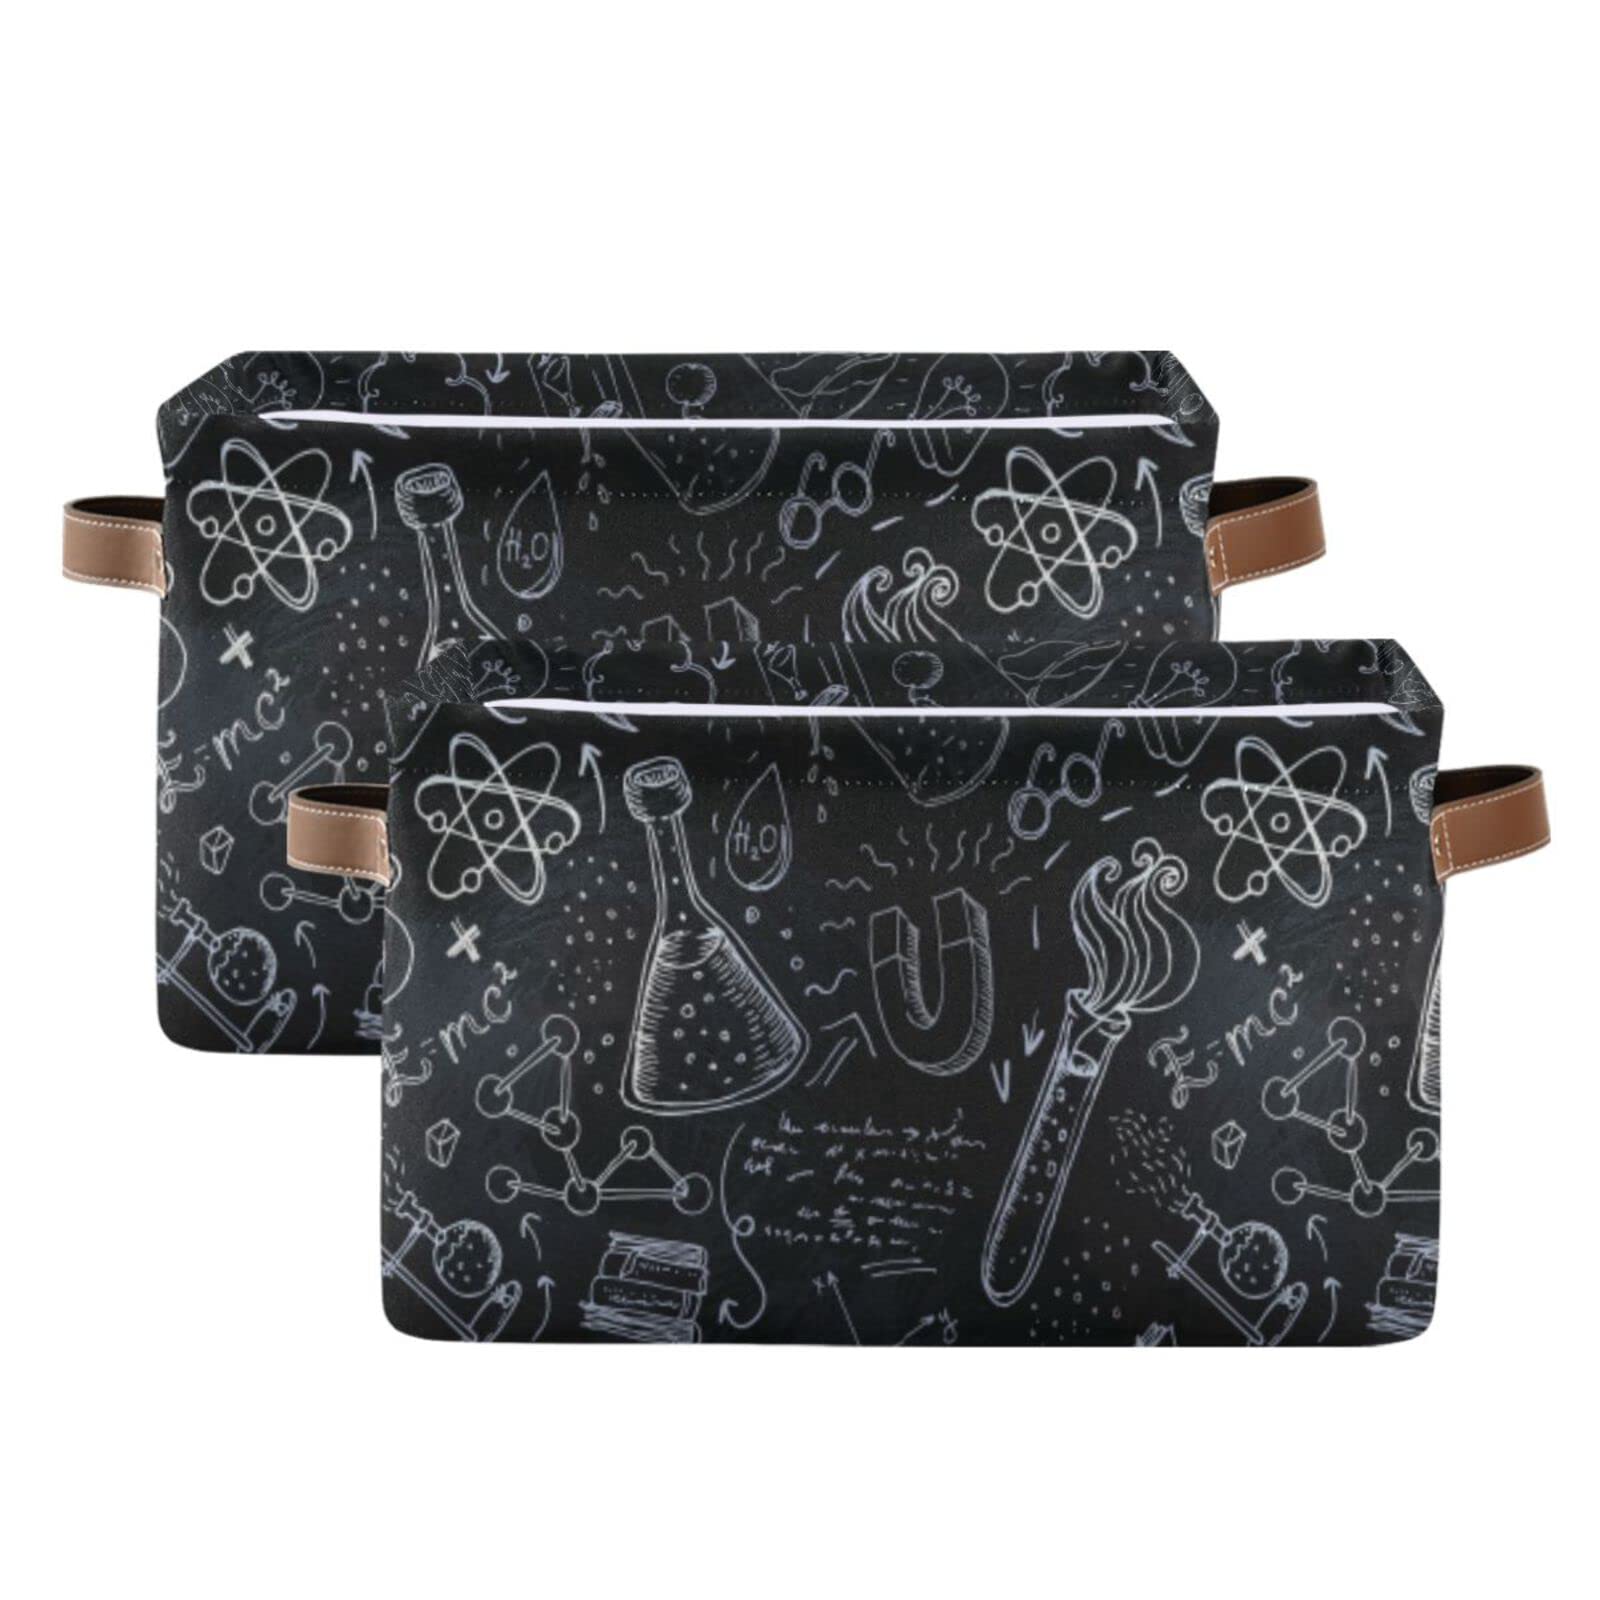 White Science Lab Objects Doodles on Chalkboard 1 PC Rectangle Storage Basket Collapsible Fabric with Leather Handles Bag Organizer Clothes for Home Bedroom 15 x 11 x 9.5 in